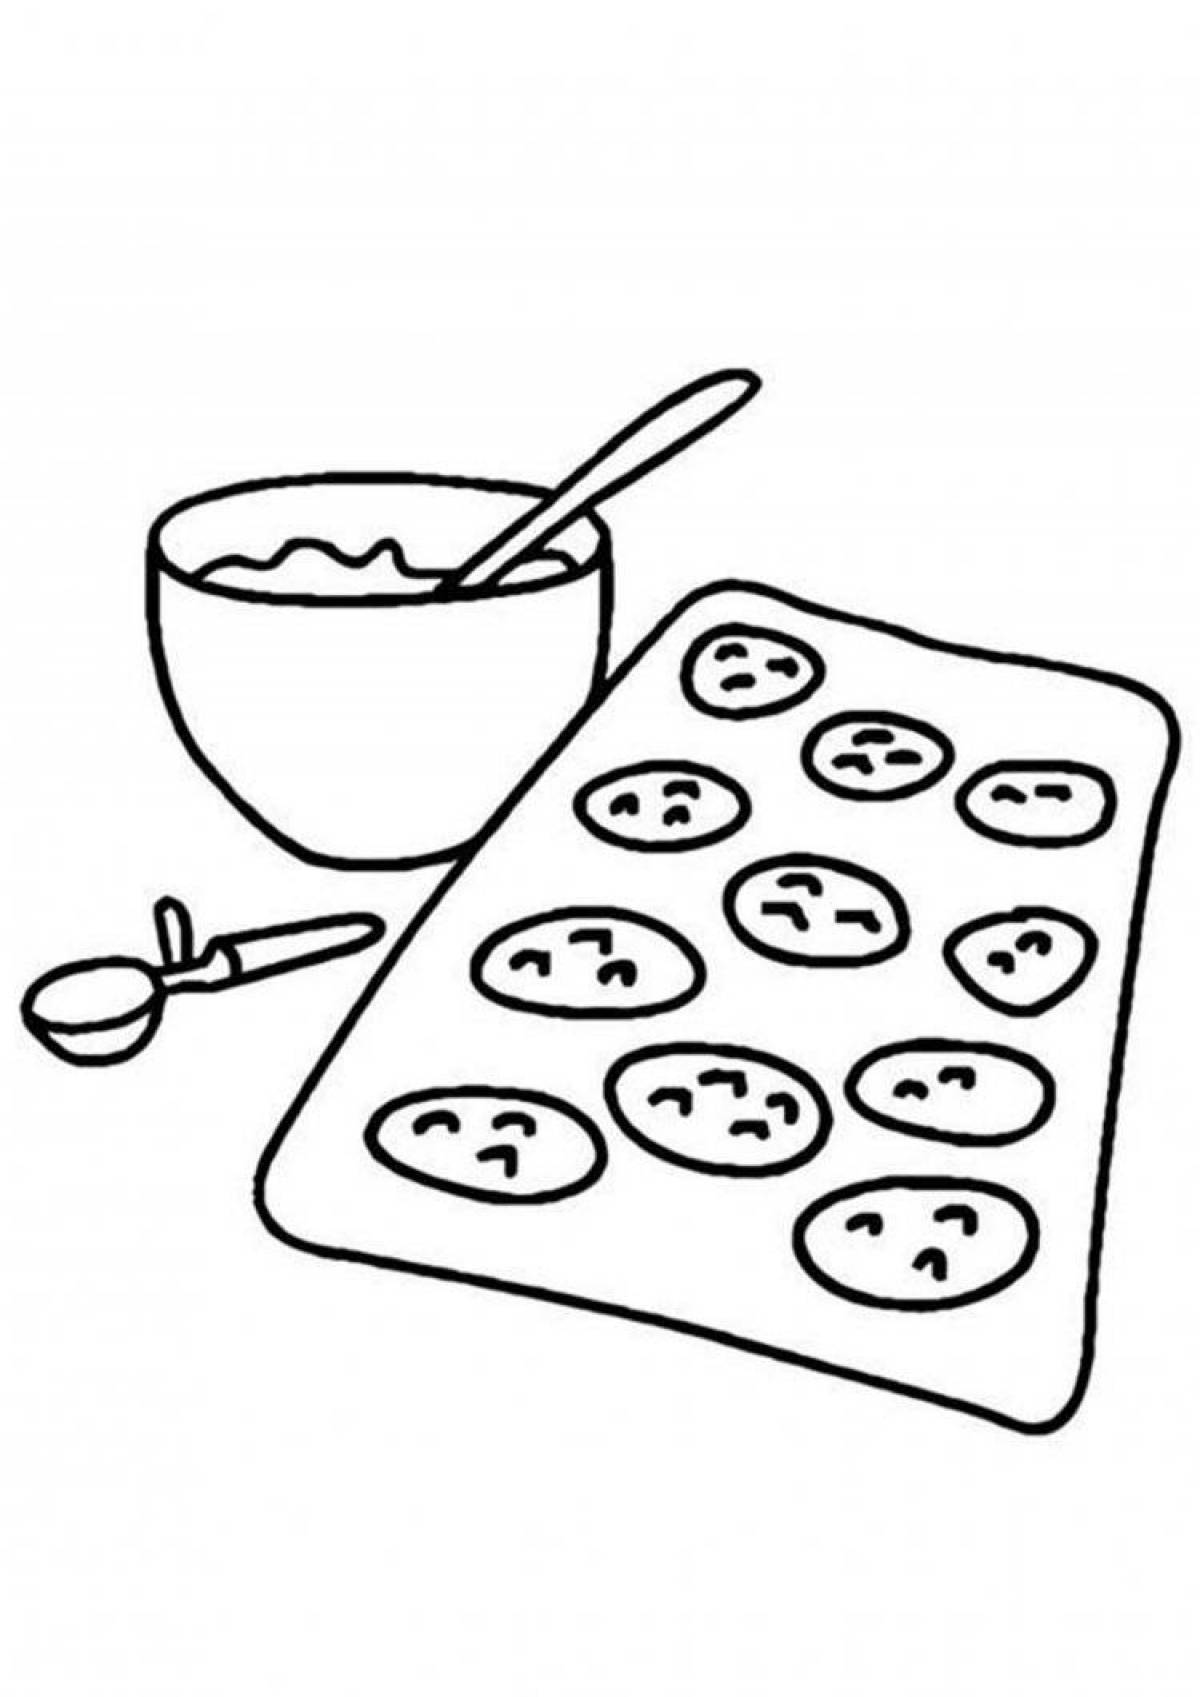 Playful cookie coloring page